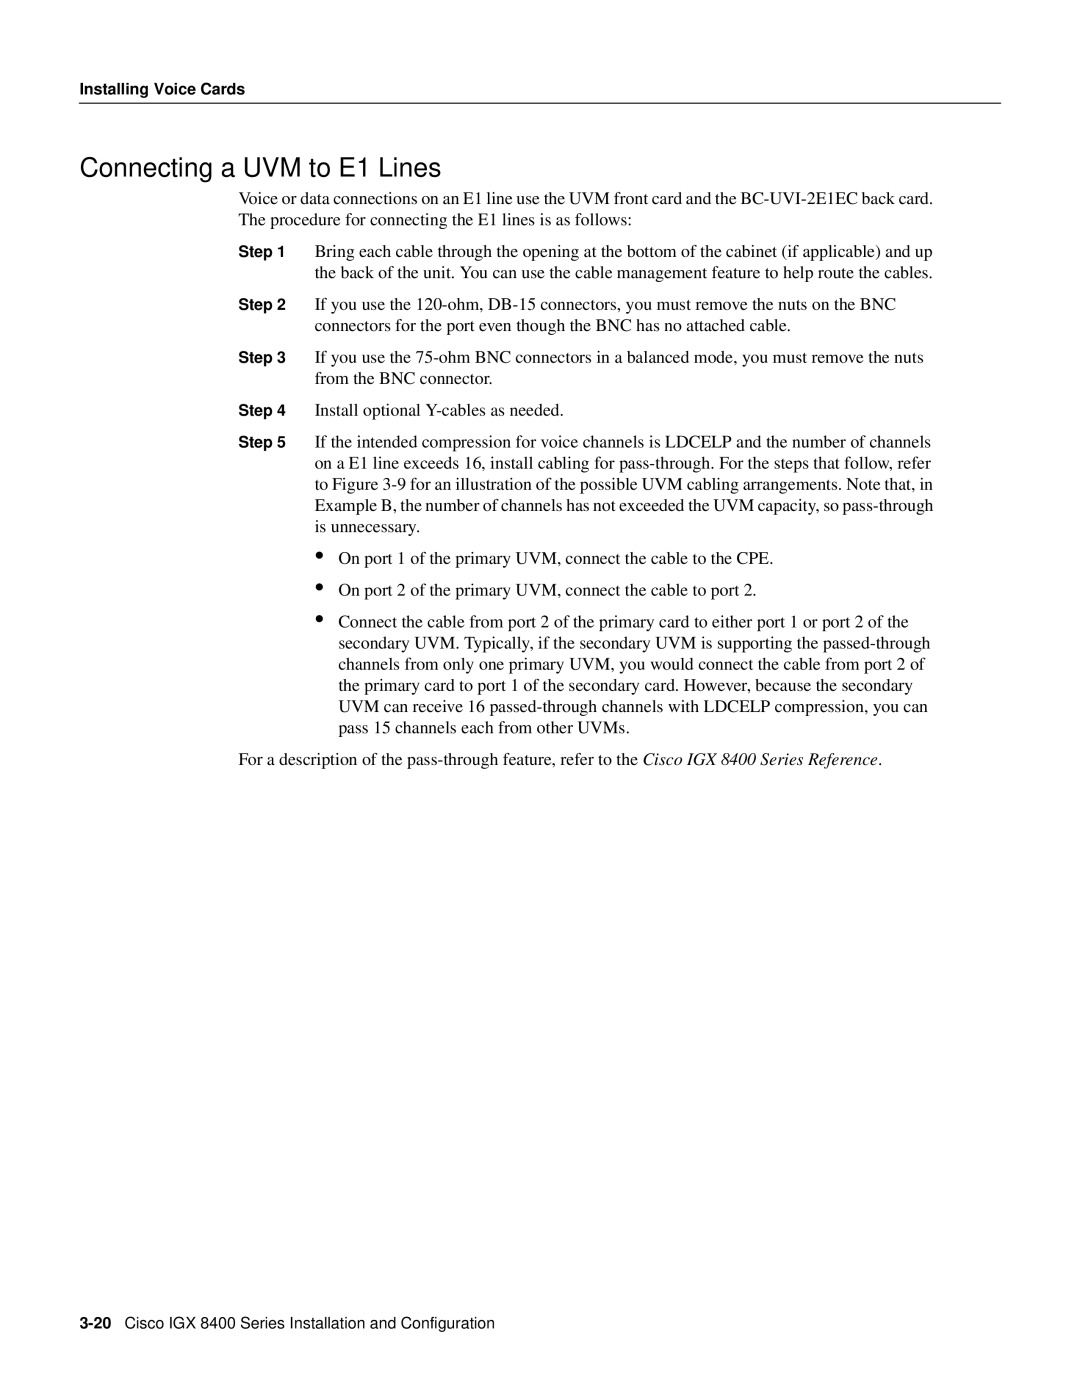 Cisco Systems manual Connecting a UVM to E1 Lines, Cisco IGX 8400 Series Installation and Configuration 